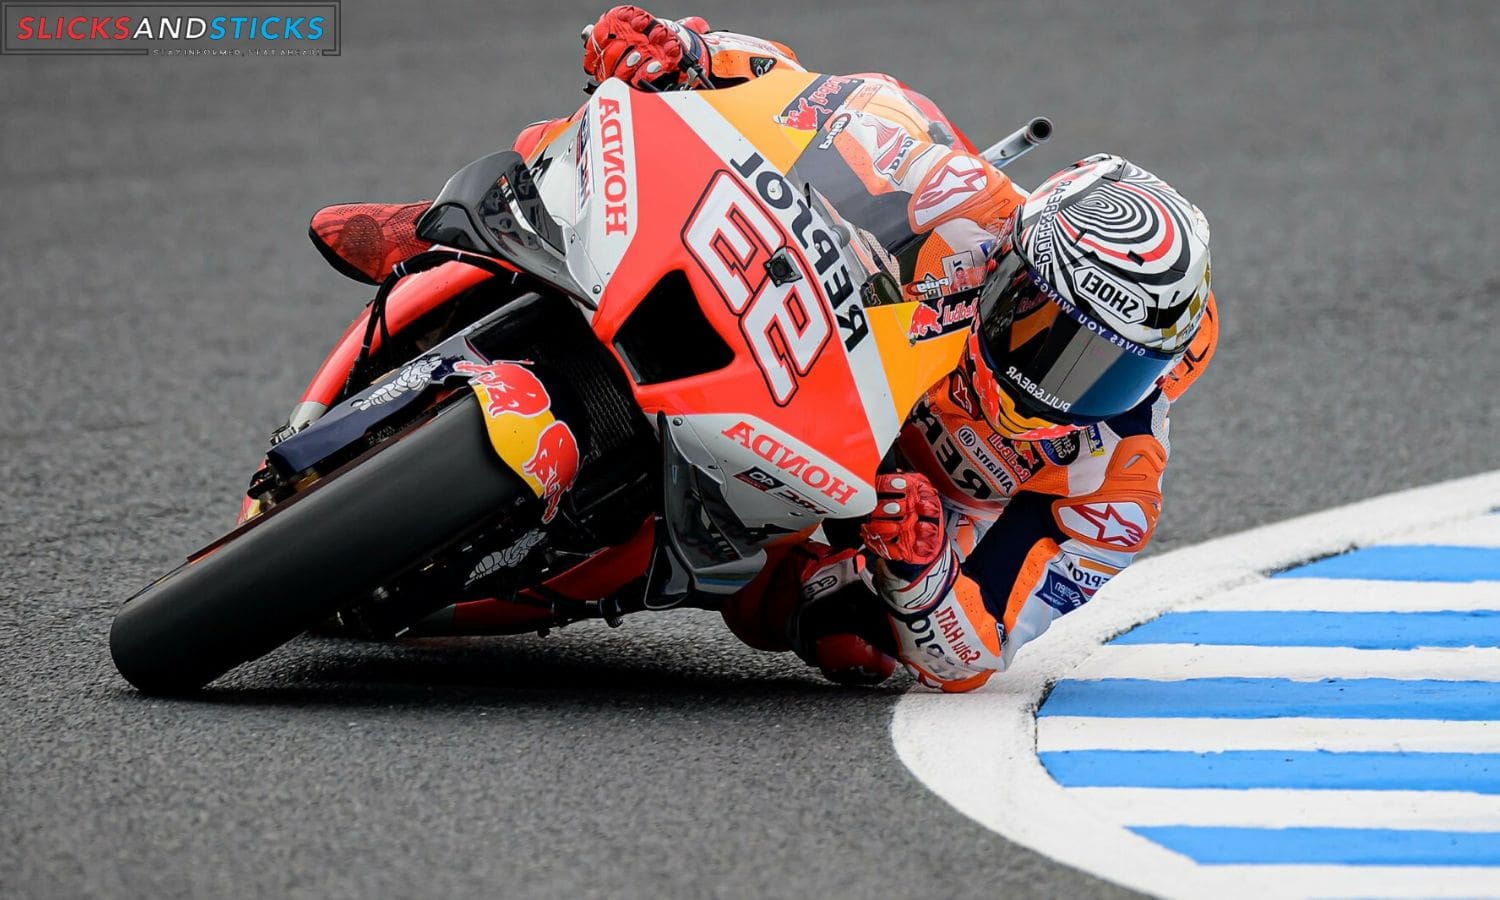 honda-motogp-journey-challenges-collaboration-and-resilienc